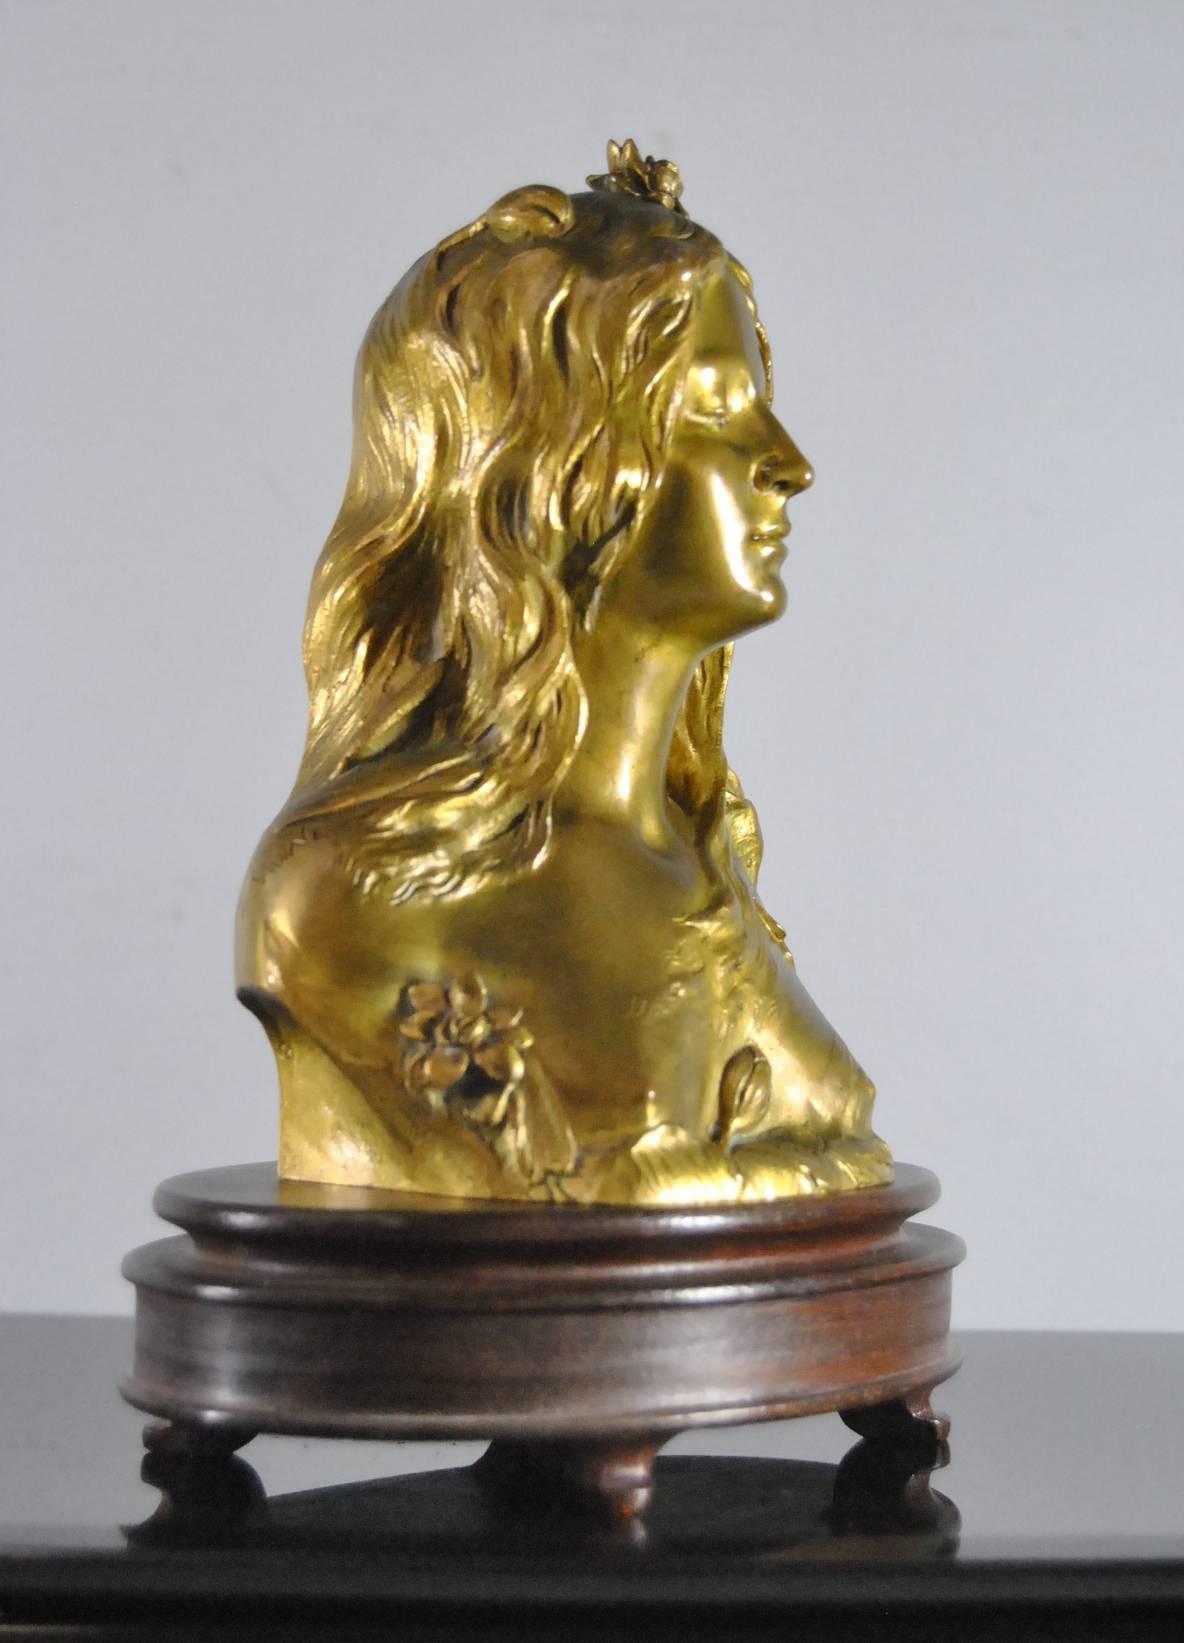 An Art Nouvea Gilt Bronze Bust of Ophelia by Leopold Savine (1861-1934).  A beautiful bust with the back depicting water and trees by which she met her demise.  Signed L. Savine in the bronze.  Bust sits on oval wood base.  